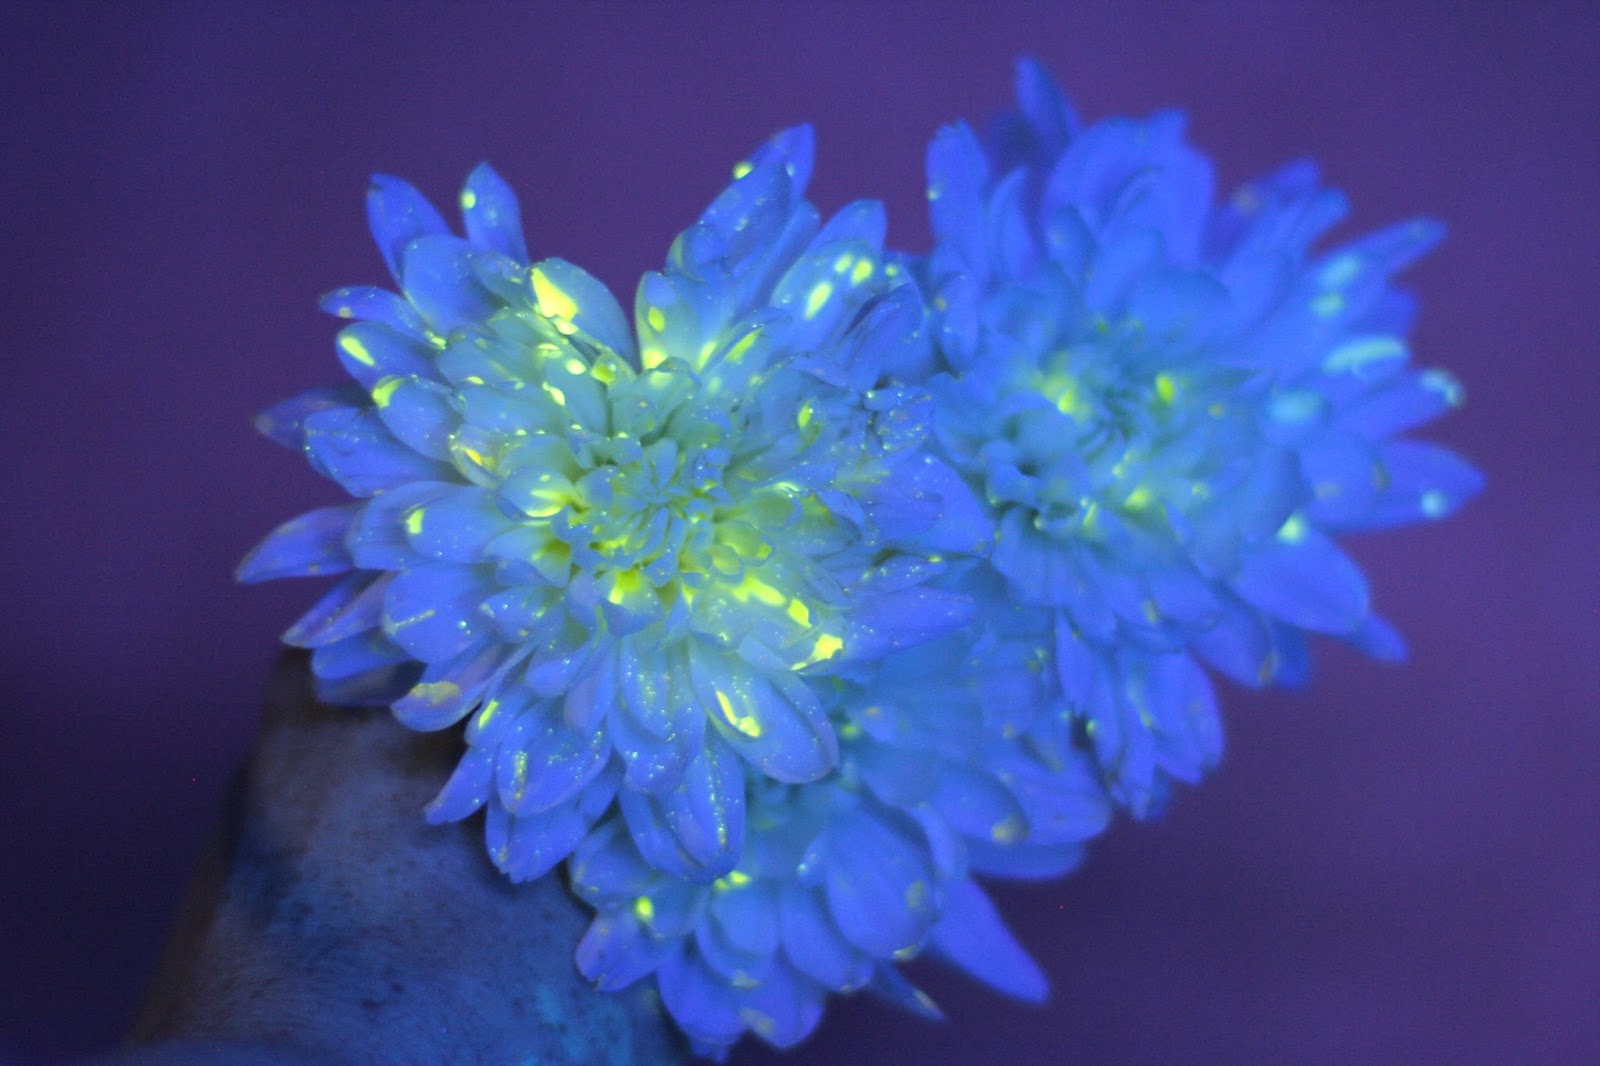 How to Make Glowing Flowers